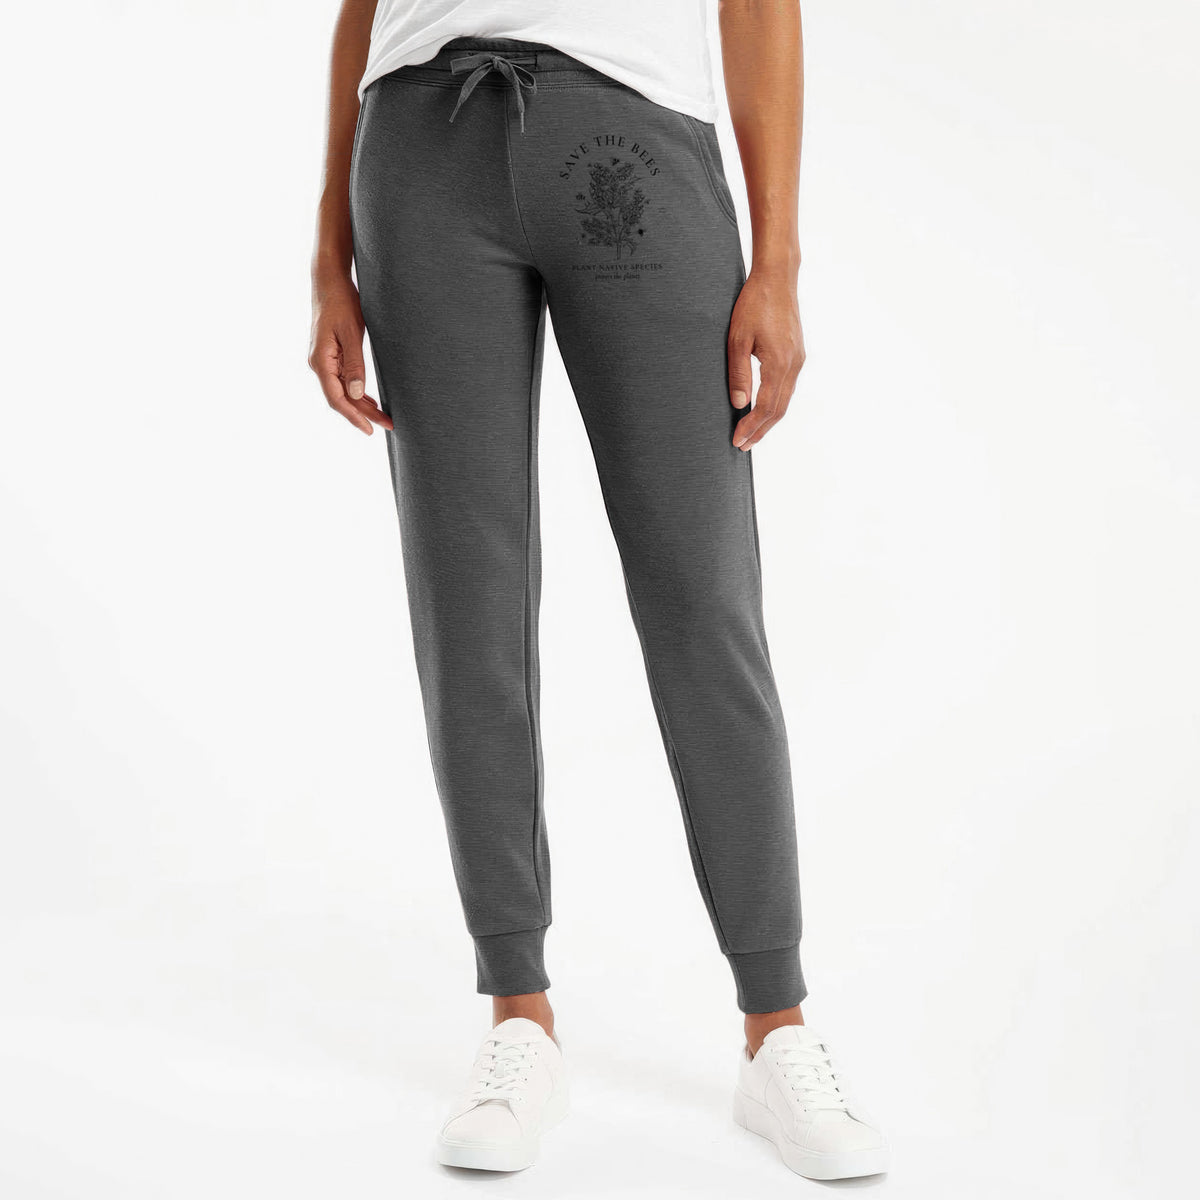 Save the Bees - Plant Native Species - Women&#39;s Cali Wave Jogger Sweatpants